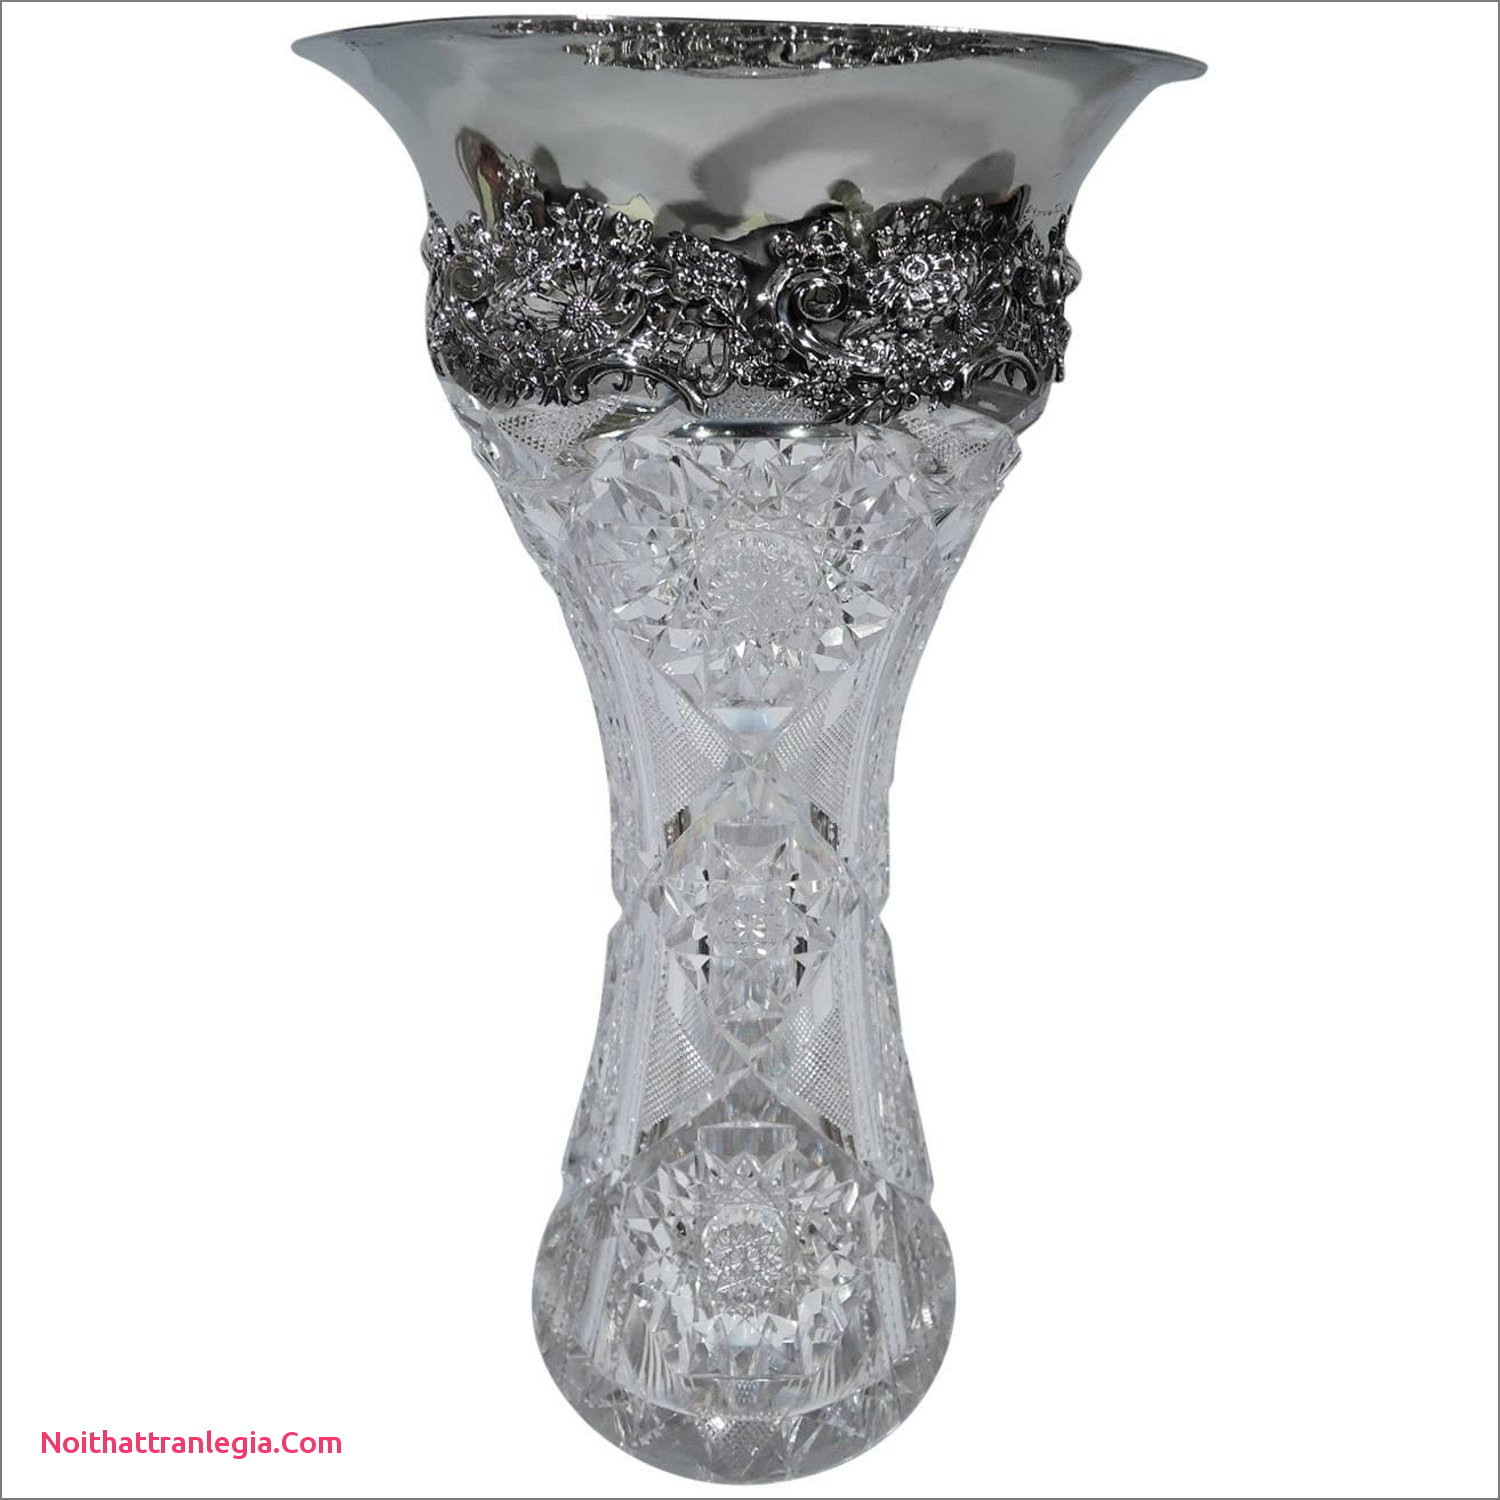 26 Perfect Cut Glass Vase 2024 free download cut glass vase of 20 cut glass antique vase noithattranlegia vases design with regard to antique brilliant cut glass and sterling silver vase by redlich for sale at 1stdibs